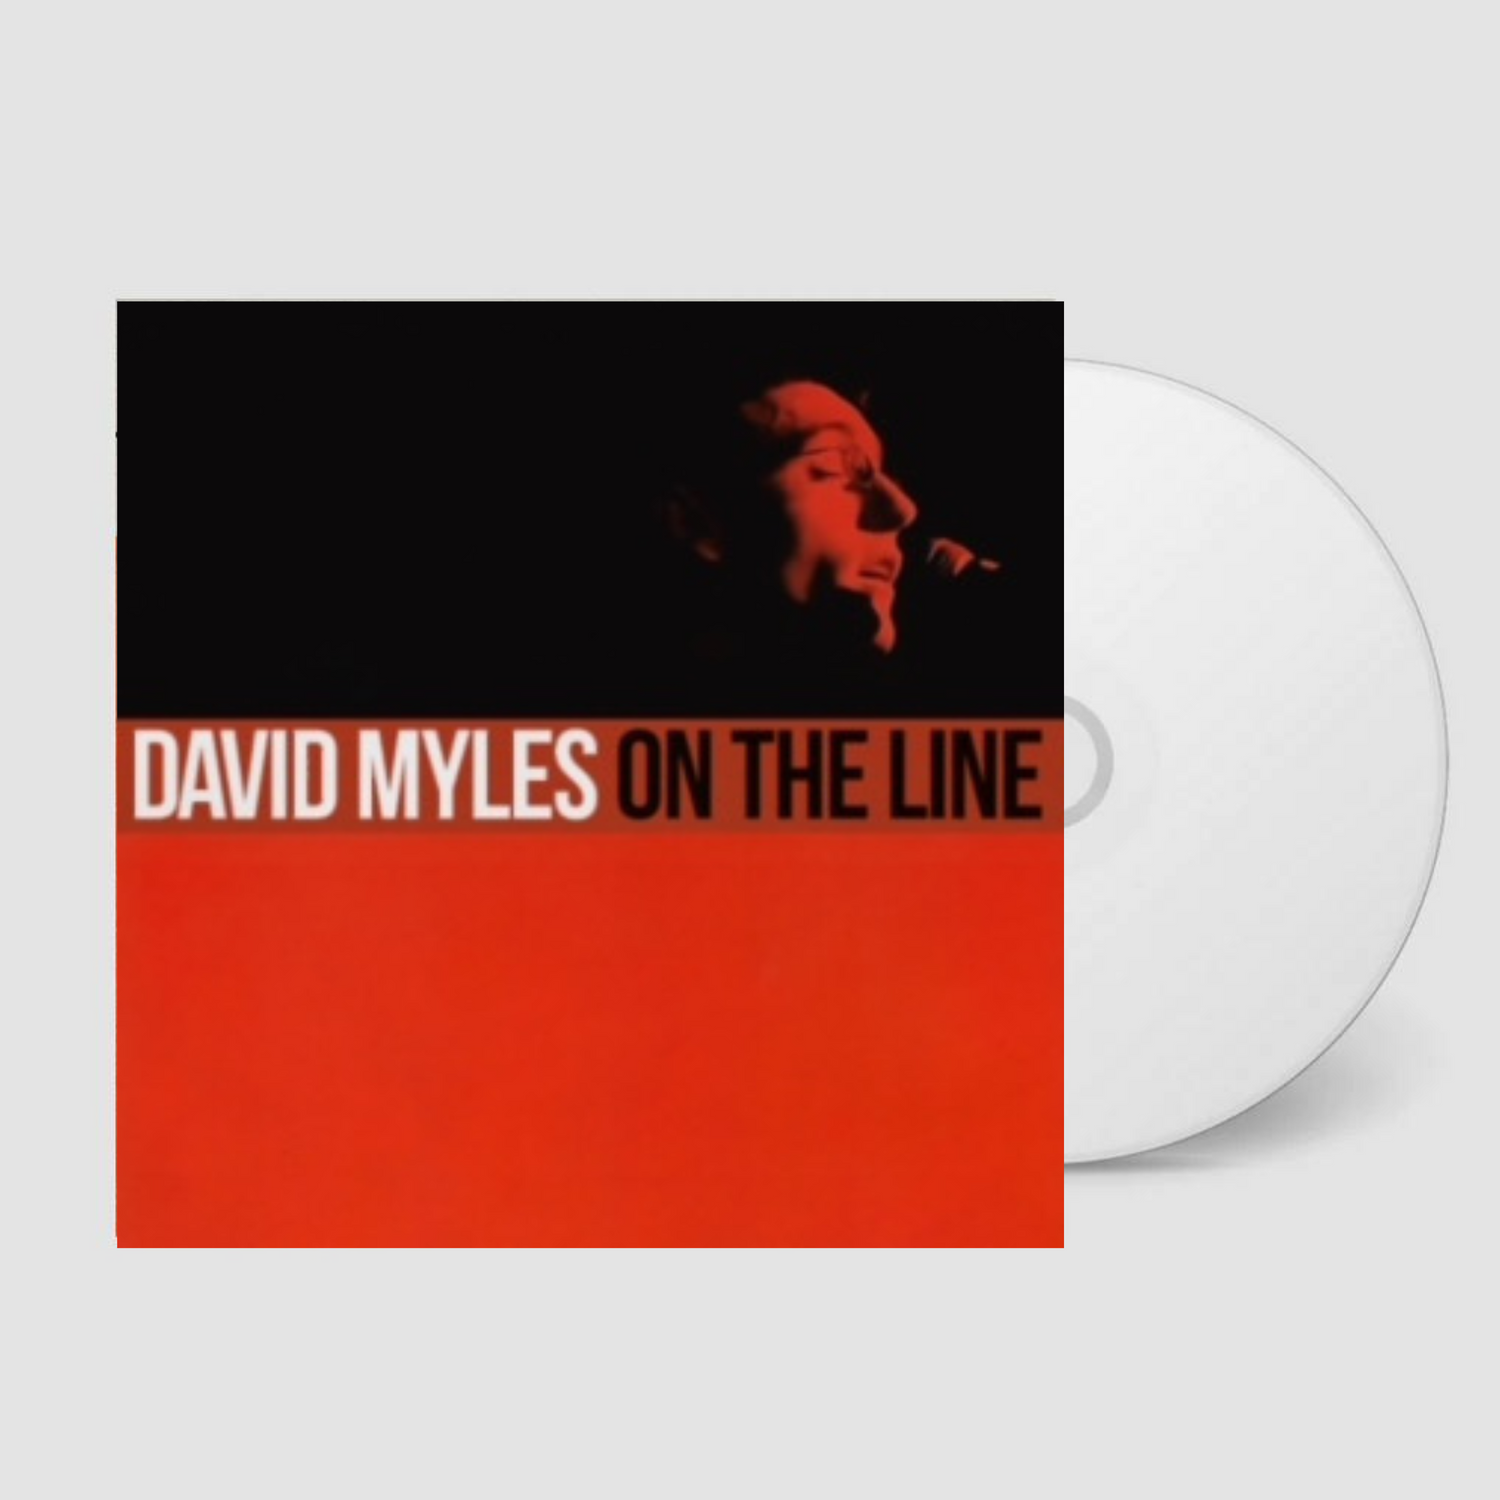 CD cover artwork for David Myles new single On the Line